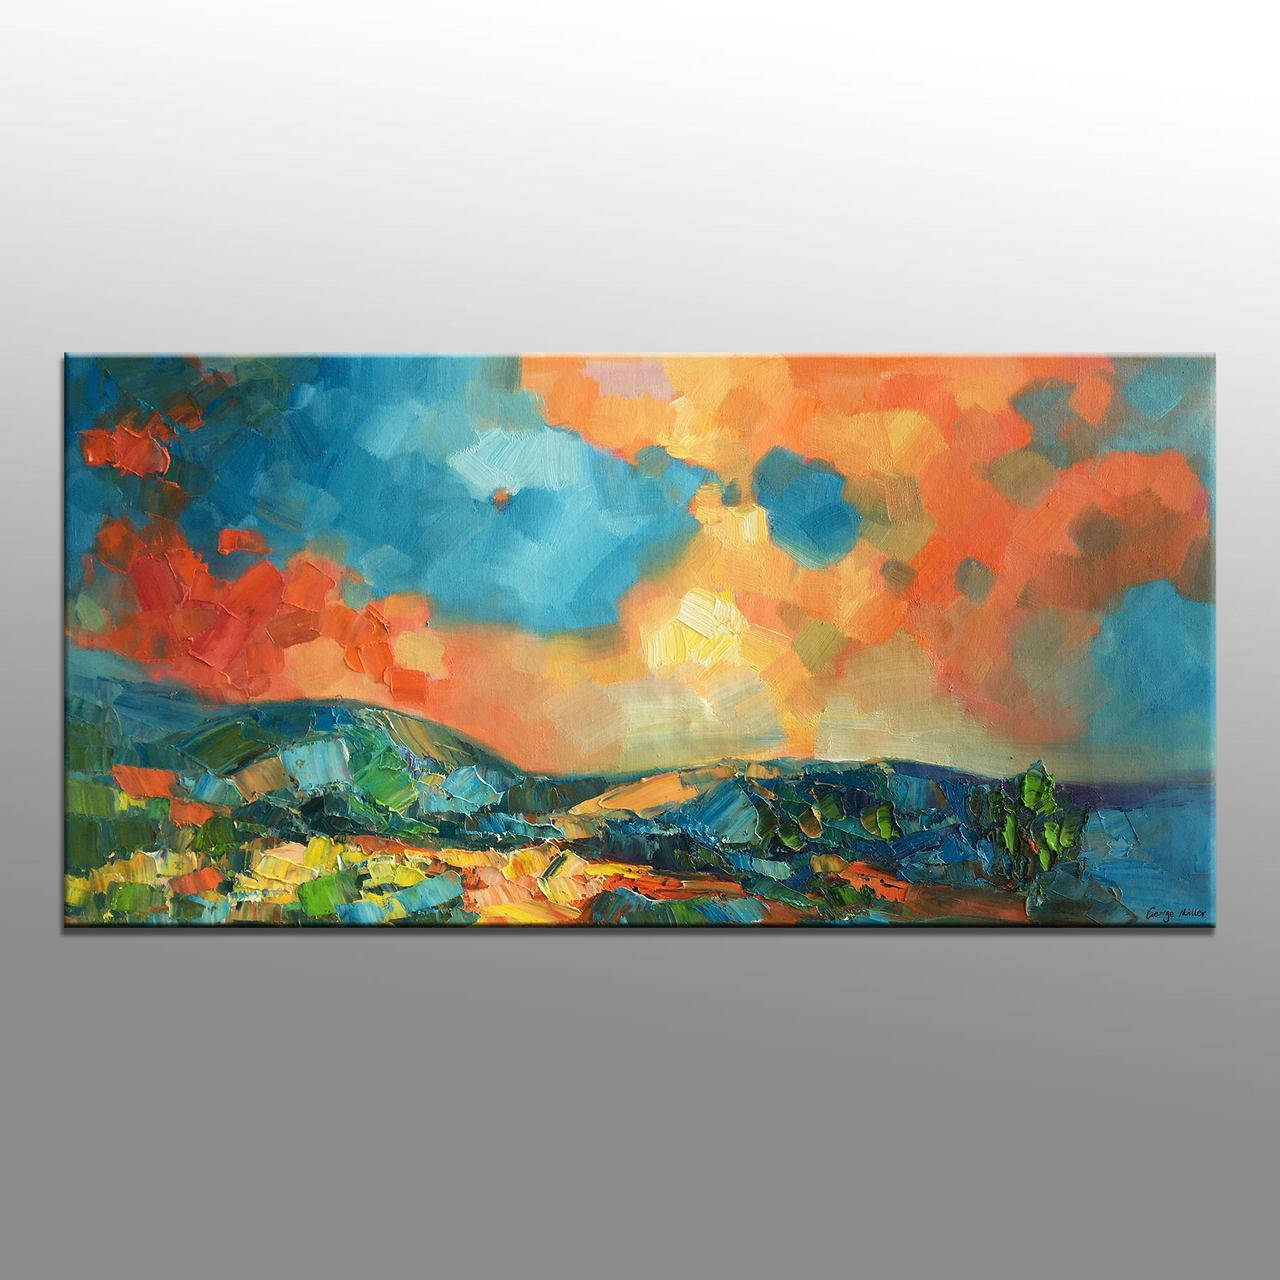 Abstract Wall Art, Large Painting, Abstract Canvas Painting, Original, Abstract Oil Painting, Landscape Painting, Living Room Wall Decor